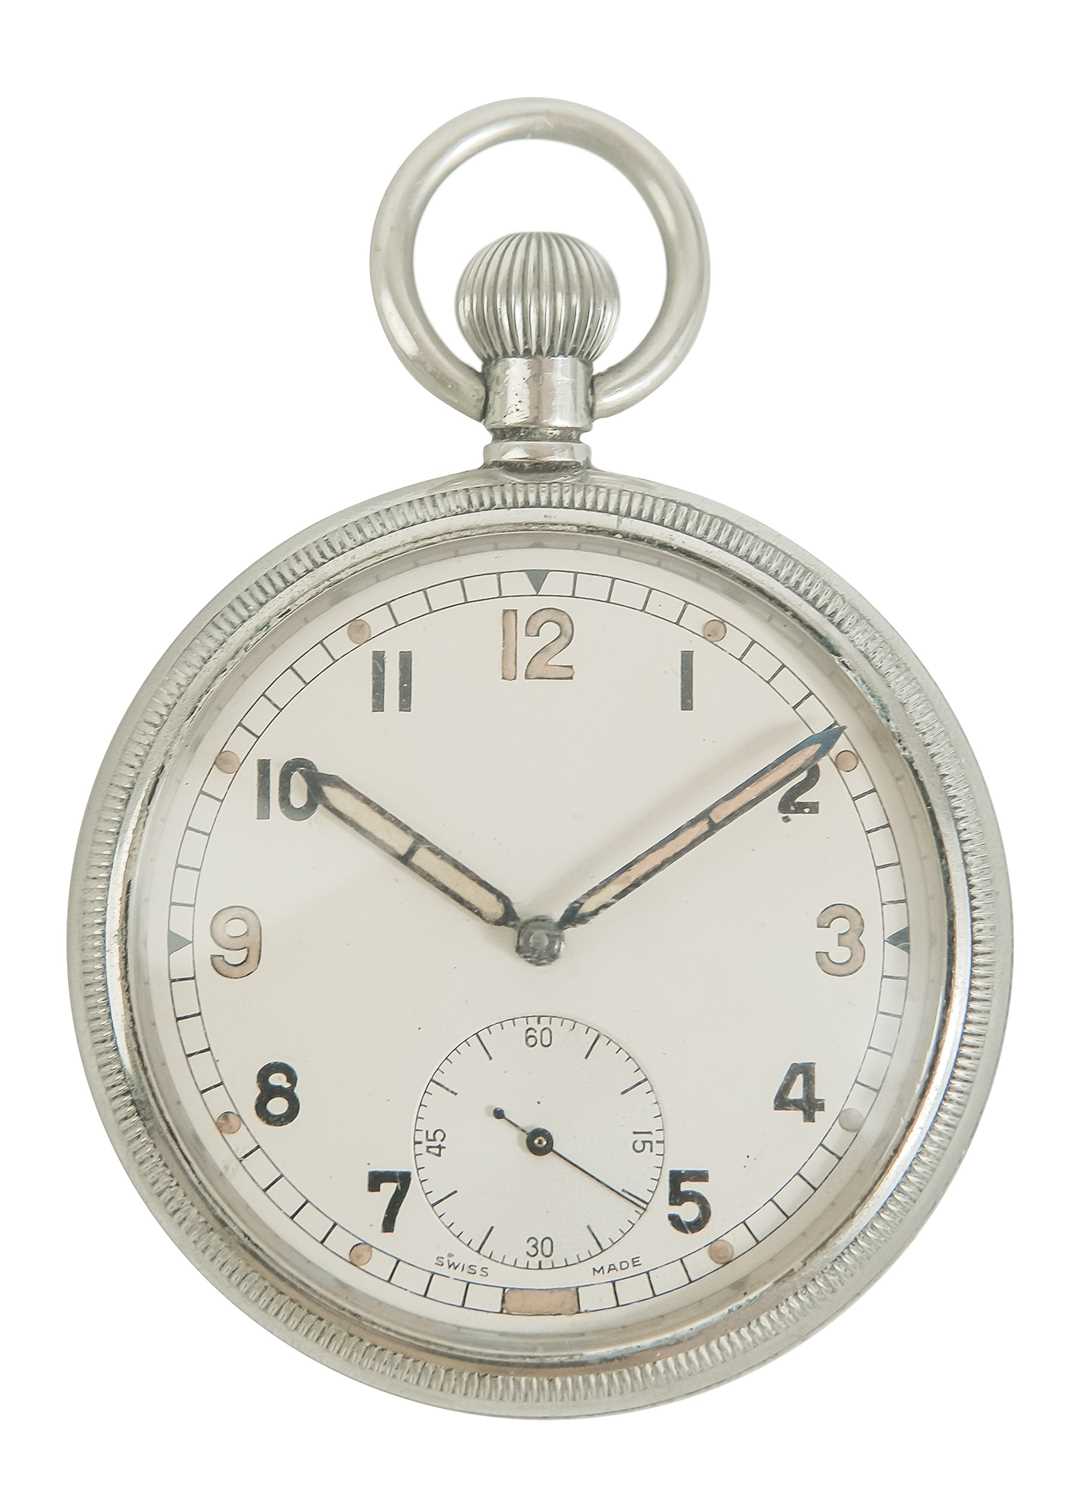 A British Military Army issue nickel cased lever pocket watch.